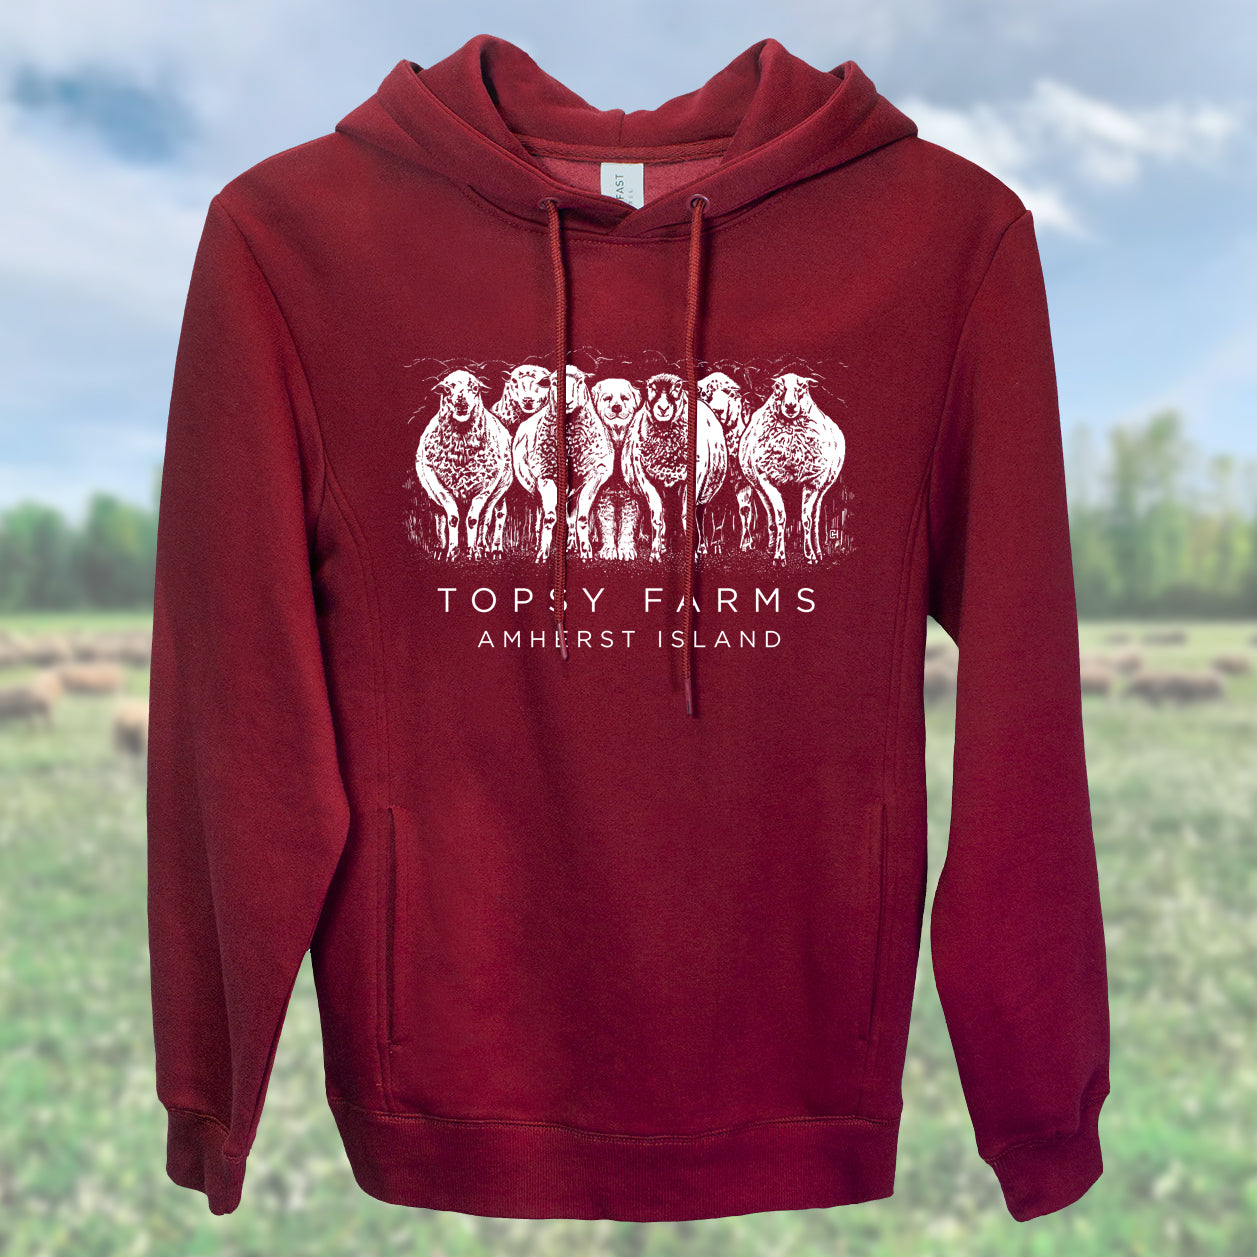 Topsy Farms' sheep and dog hoodie in burgundy